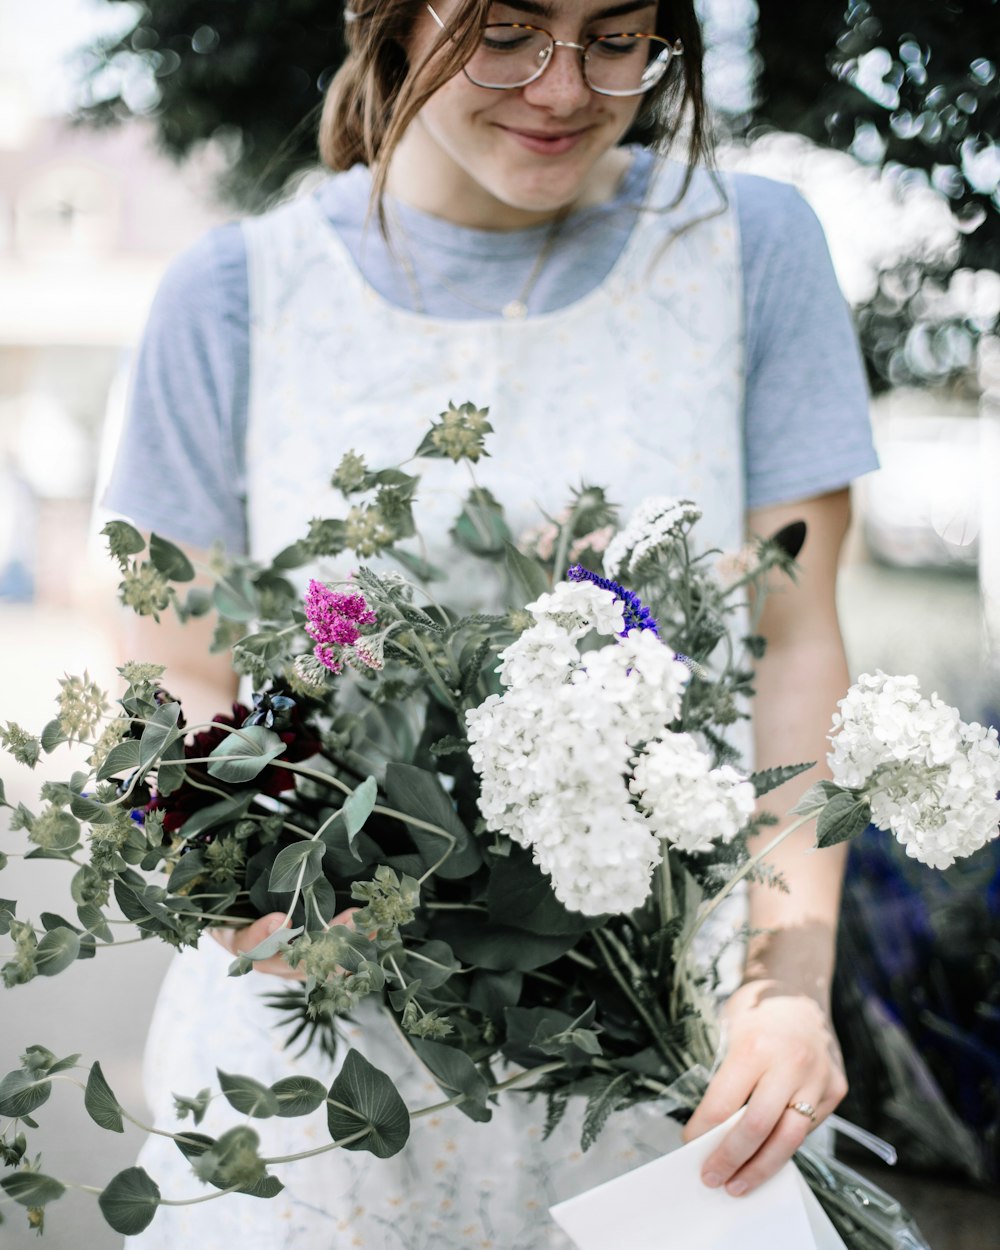 woman smiling and looking downwards while holding flowers